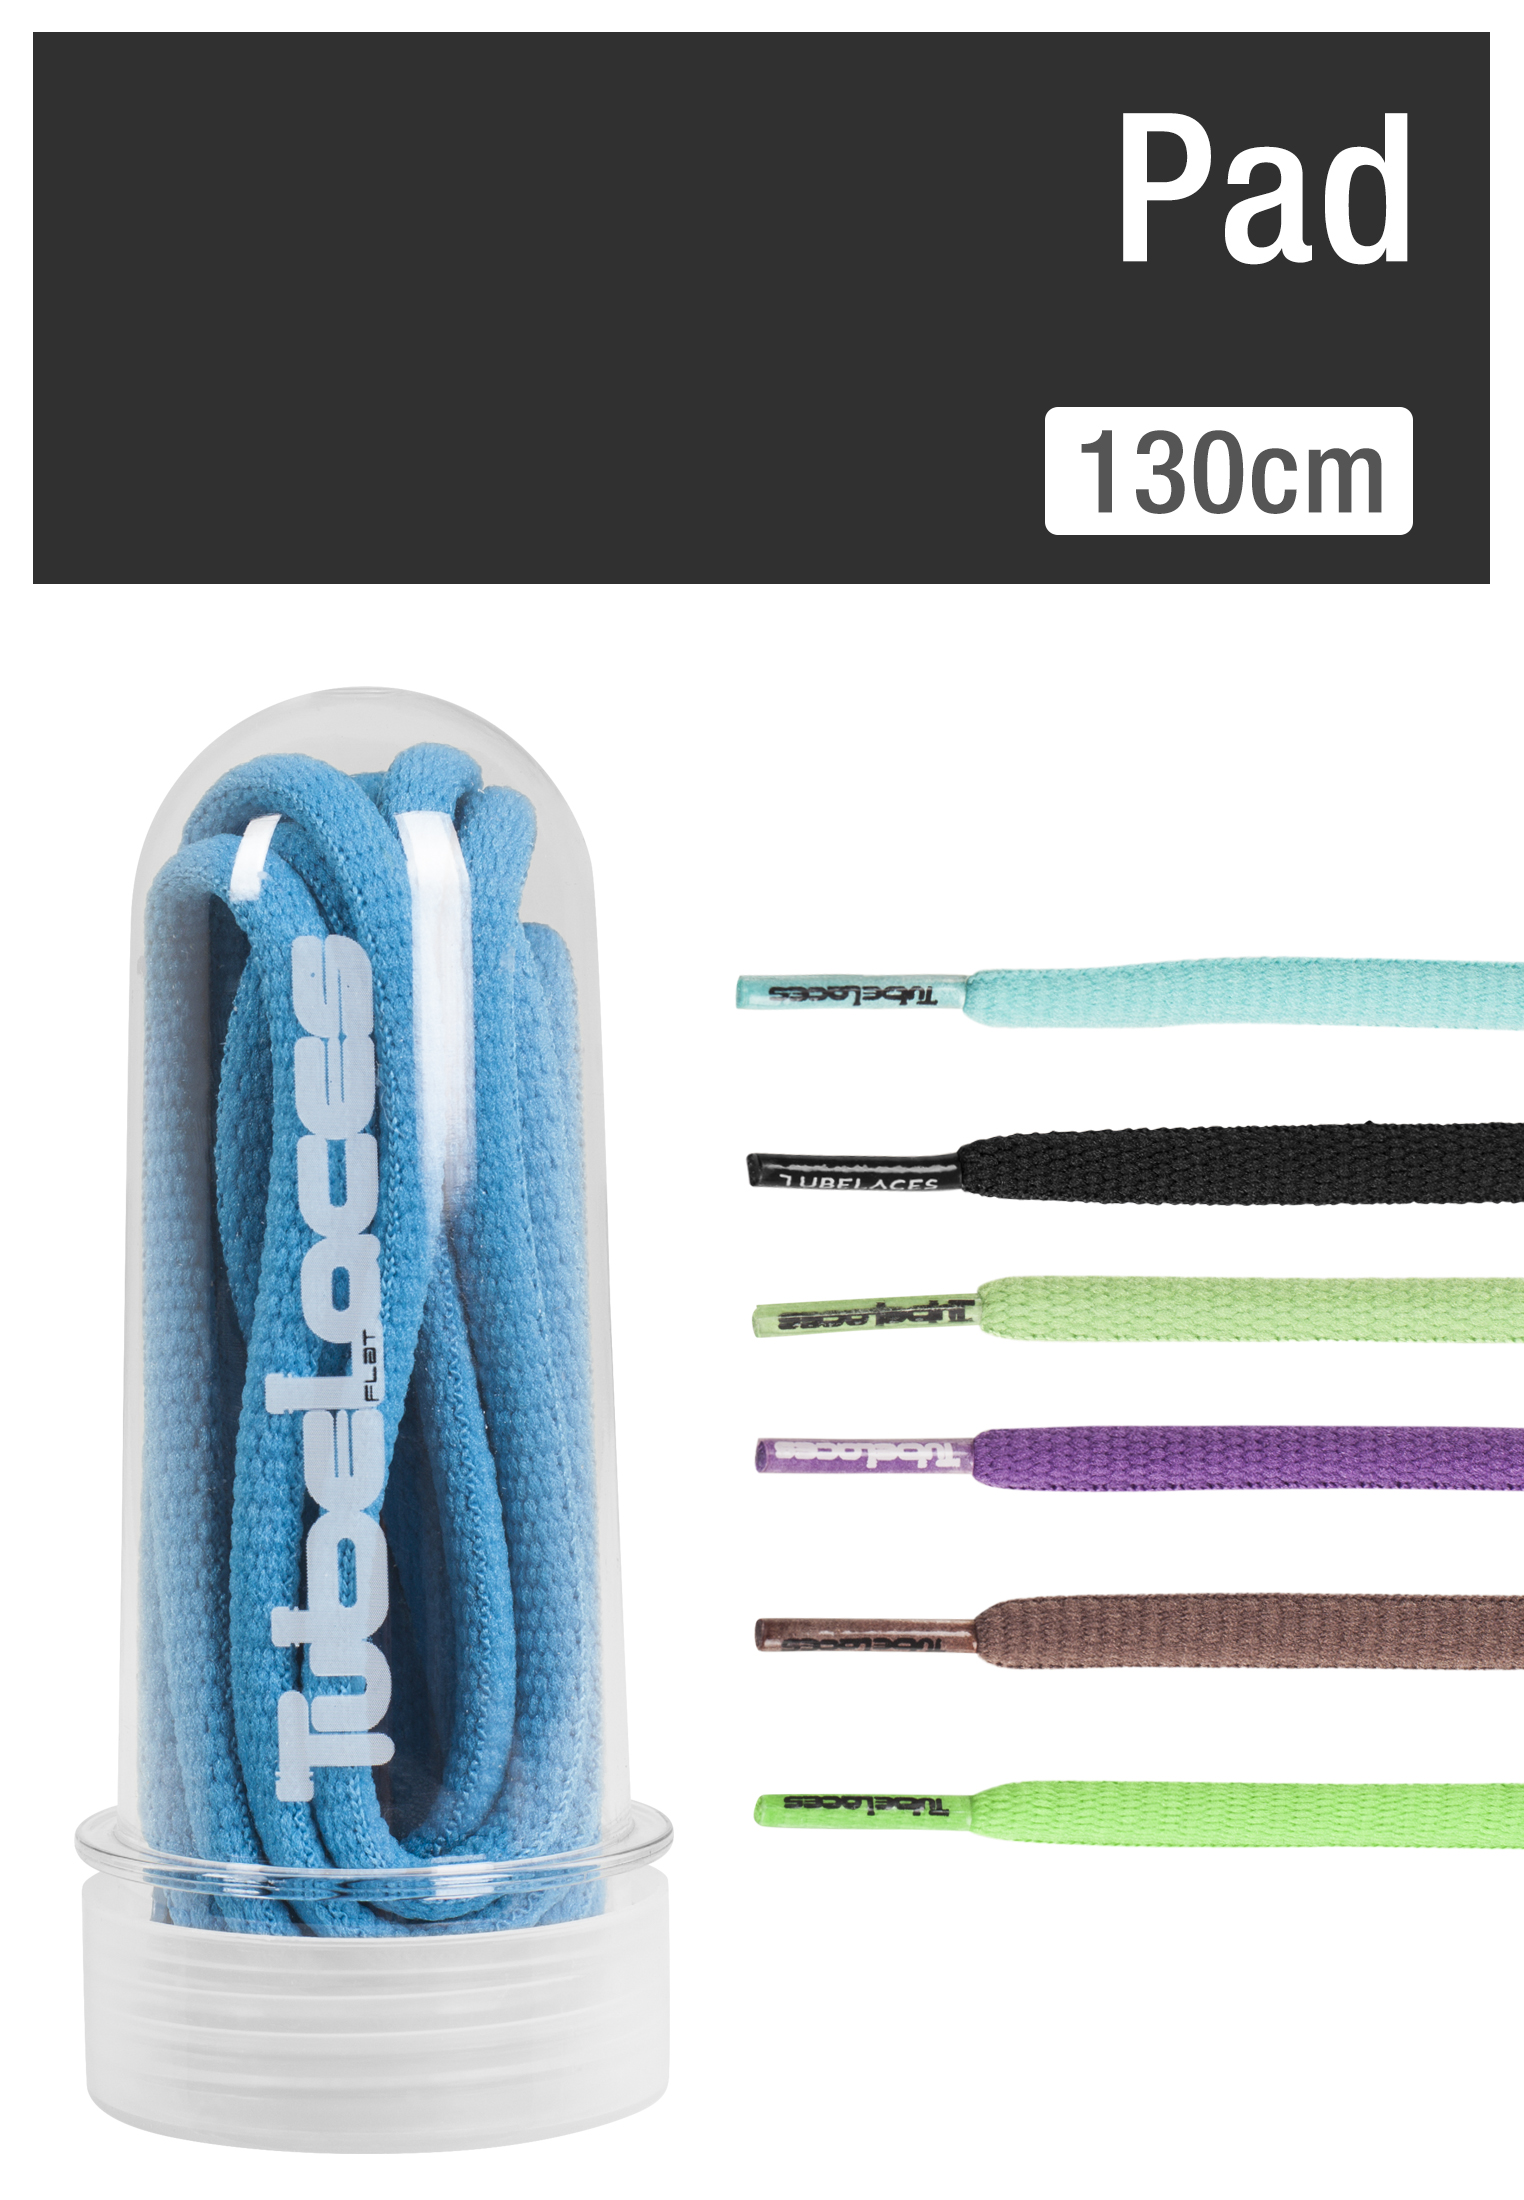 Laces Tubelaces Pad 130cm in Farbe dgry/blk